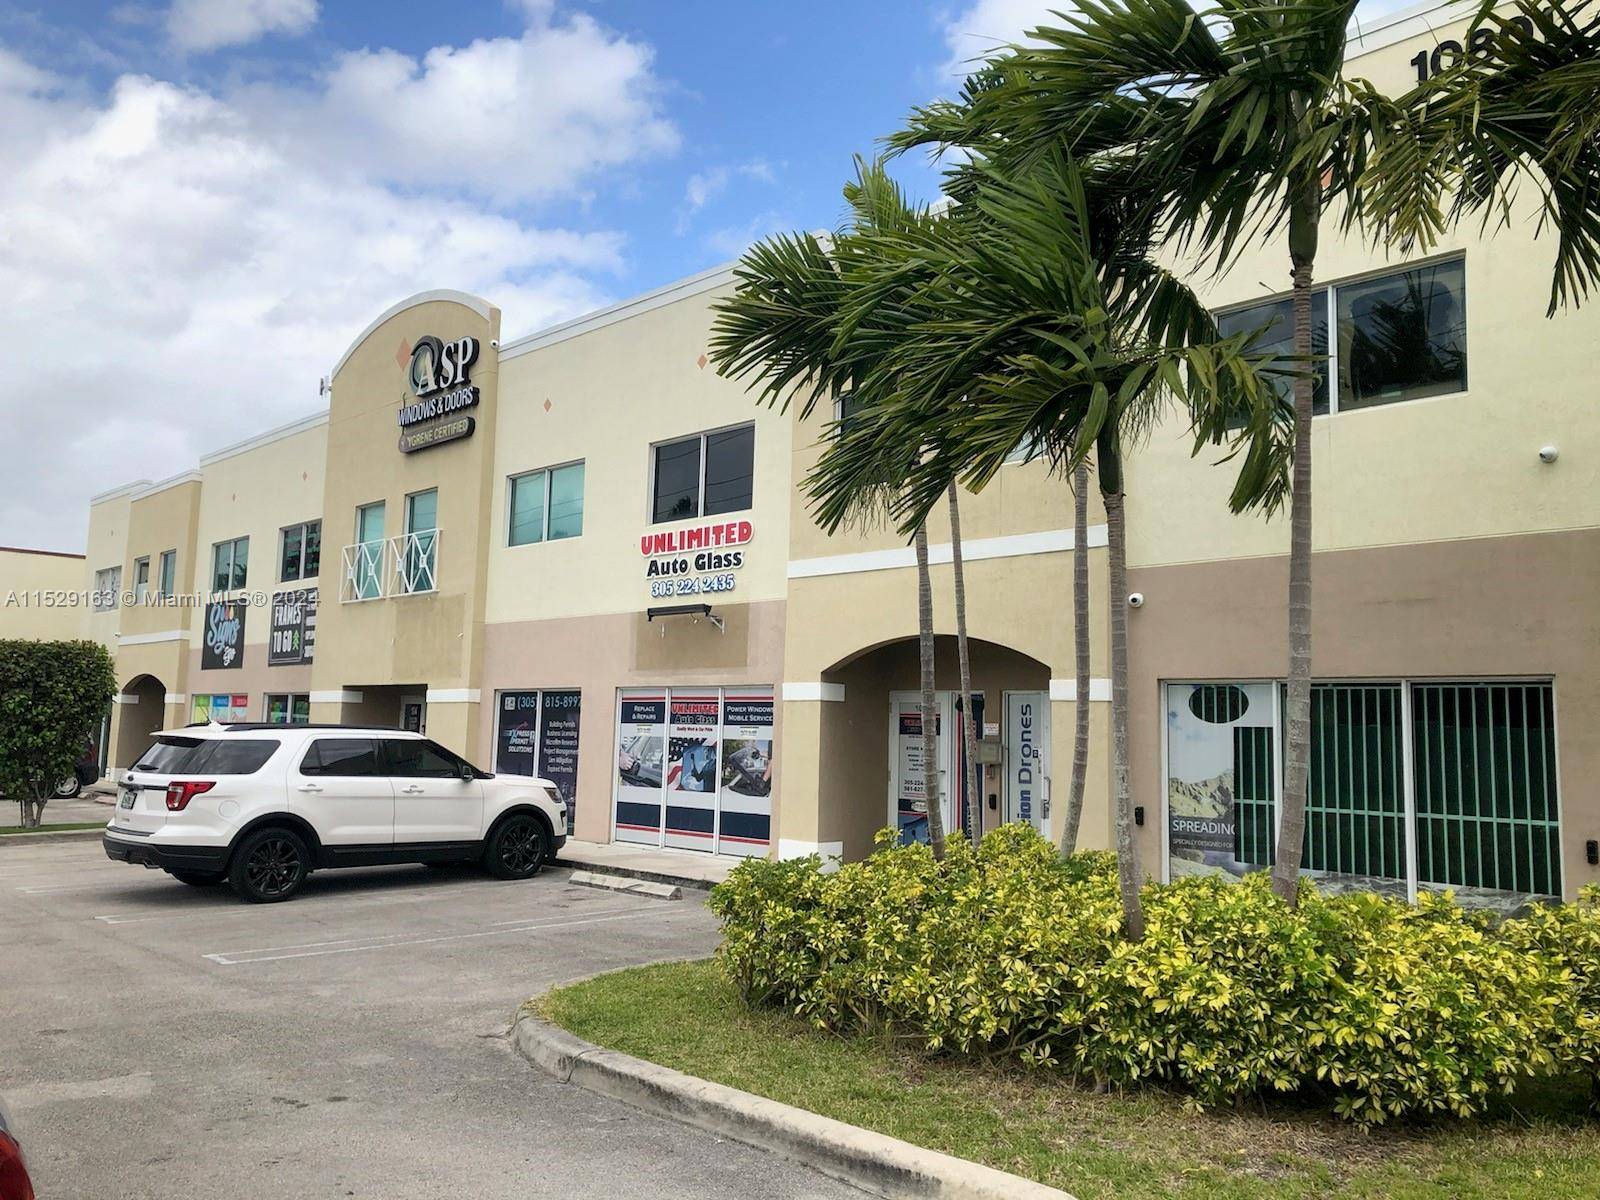 Office warehouse available in the best location, between Miami International Mall and Dolphin Mall offering the best exposure.